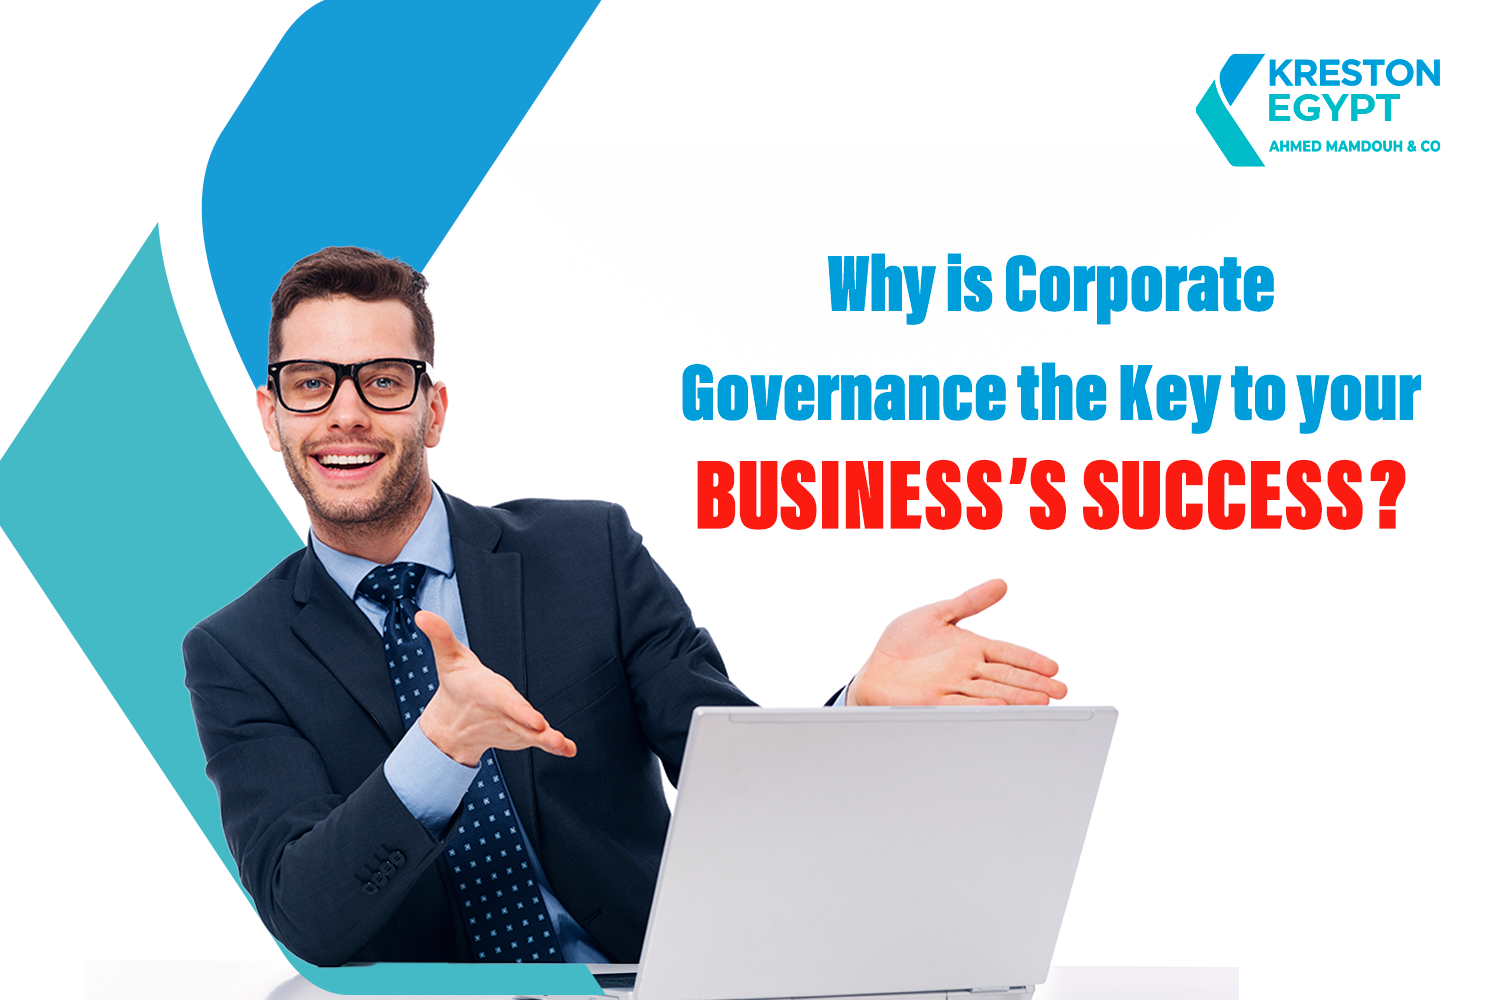 Why is Corporate Governance the key to your Business’s Success?